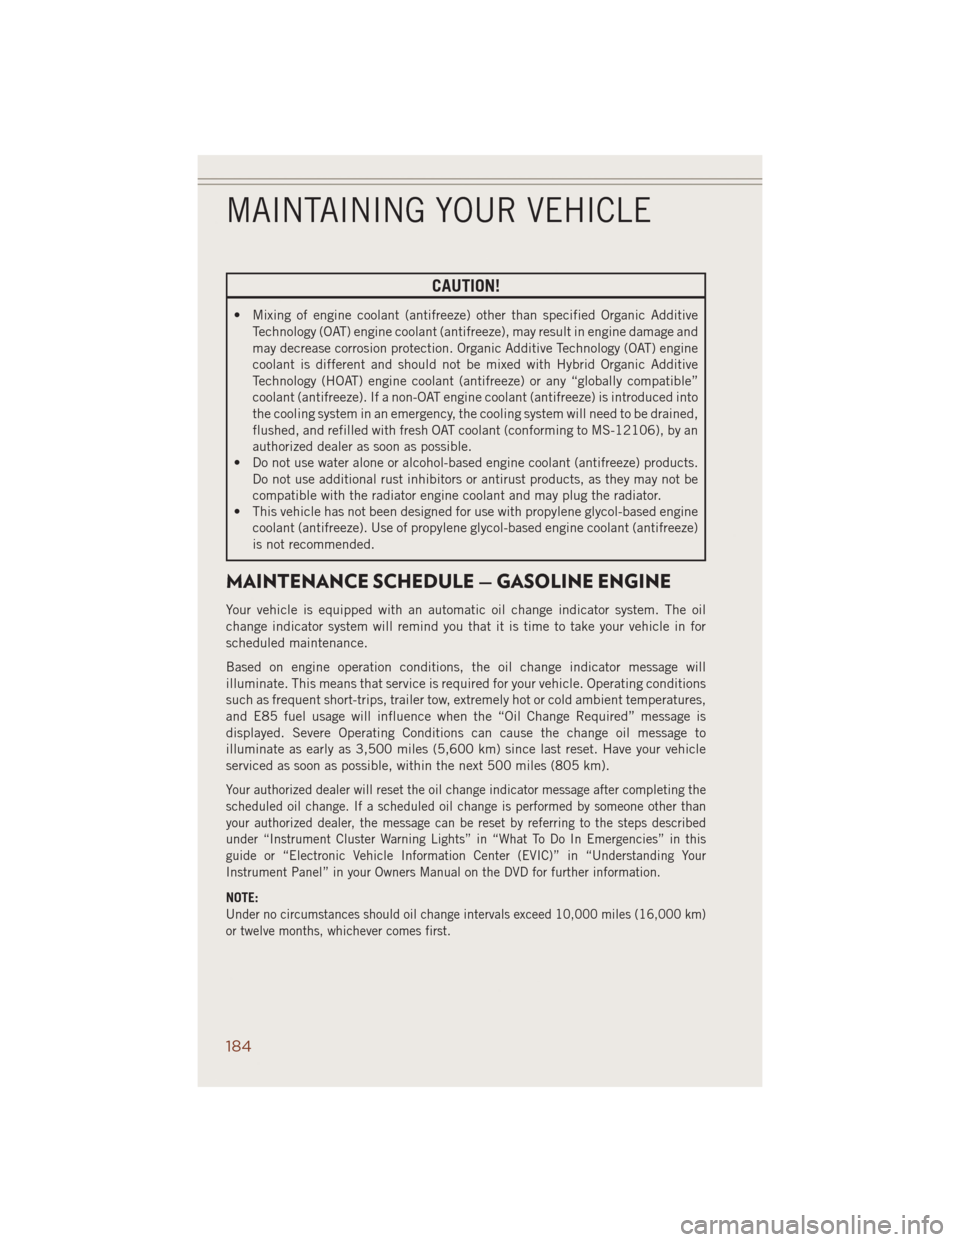 JEEP GRAND CHEROKEE 2014 WK2 / 4.G User Guide CAUTION!
• Mixing of engine coolant (antifreeze) other than specified Organic Additive
Technology (OAT) engine coolant (antifreeze), may result in engine damage and
may decrease corrosion protection